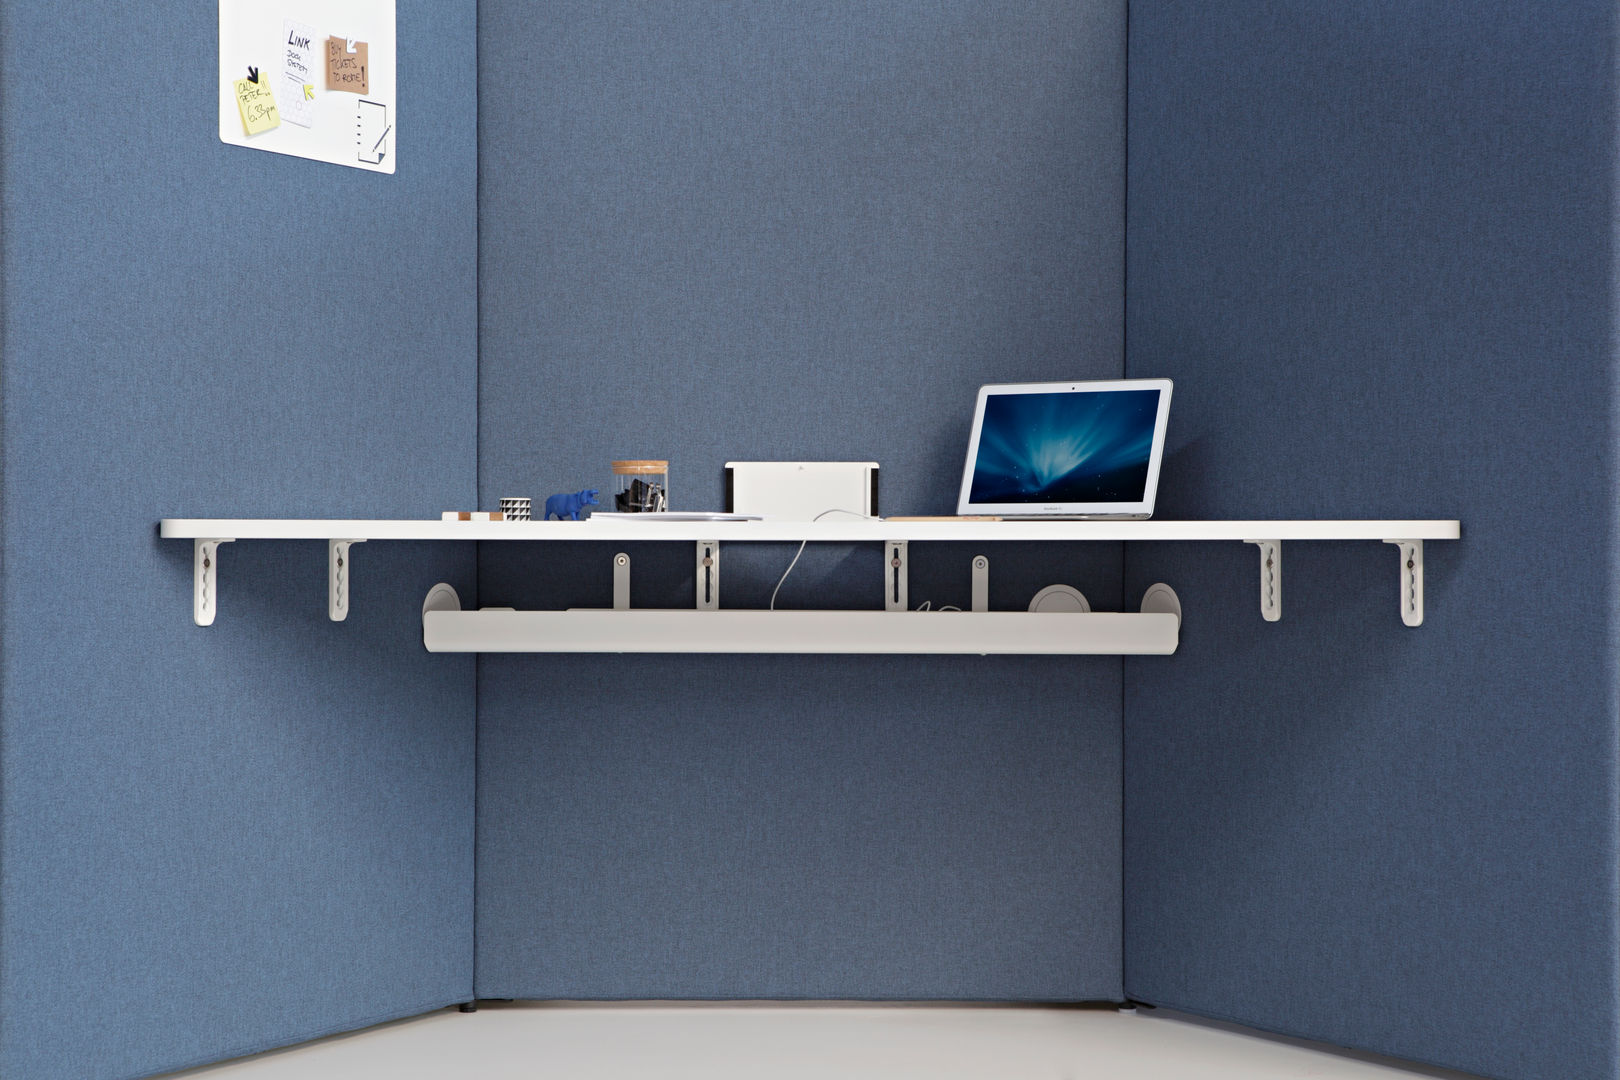 LINK Dock Sytems by ITEMdesignworks, Actiu Actiu Commercial spaces Office spaces & stores